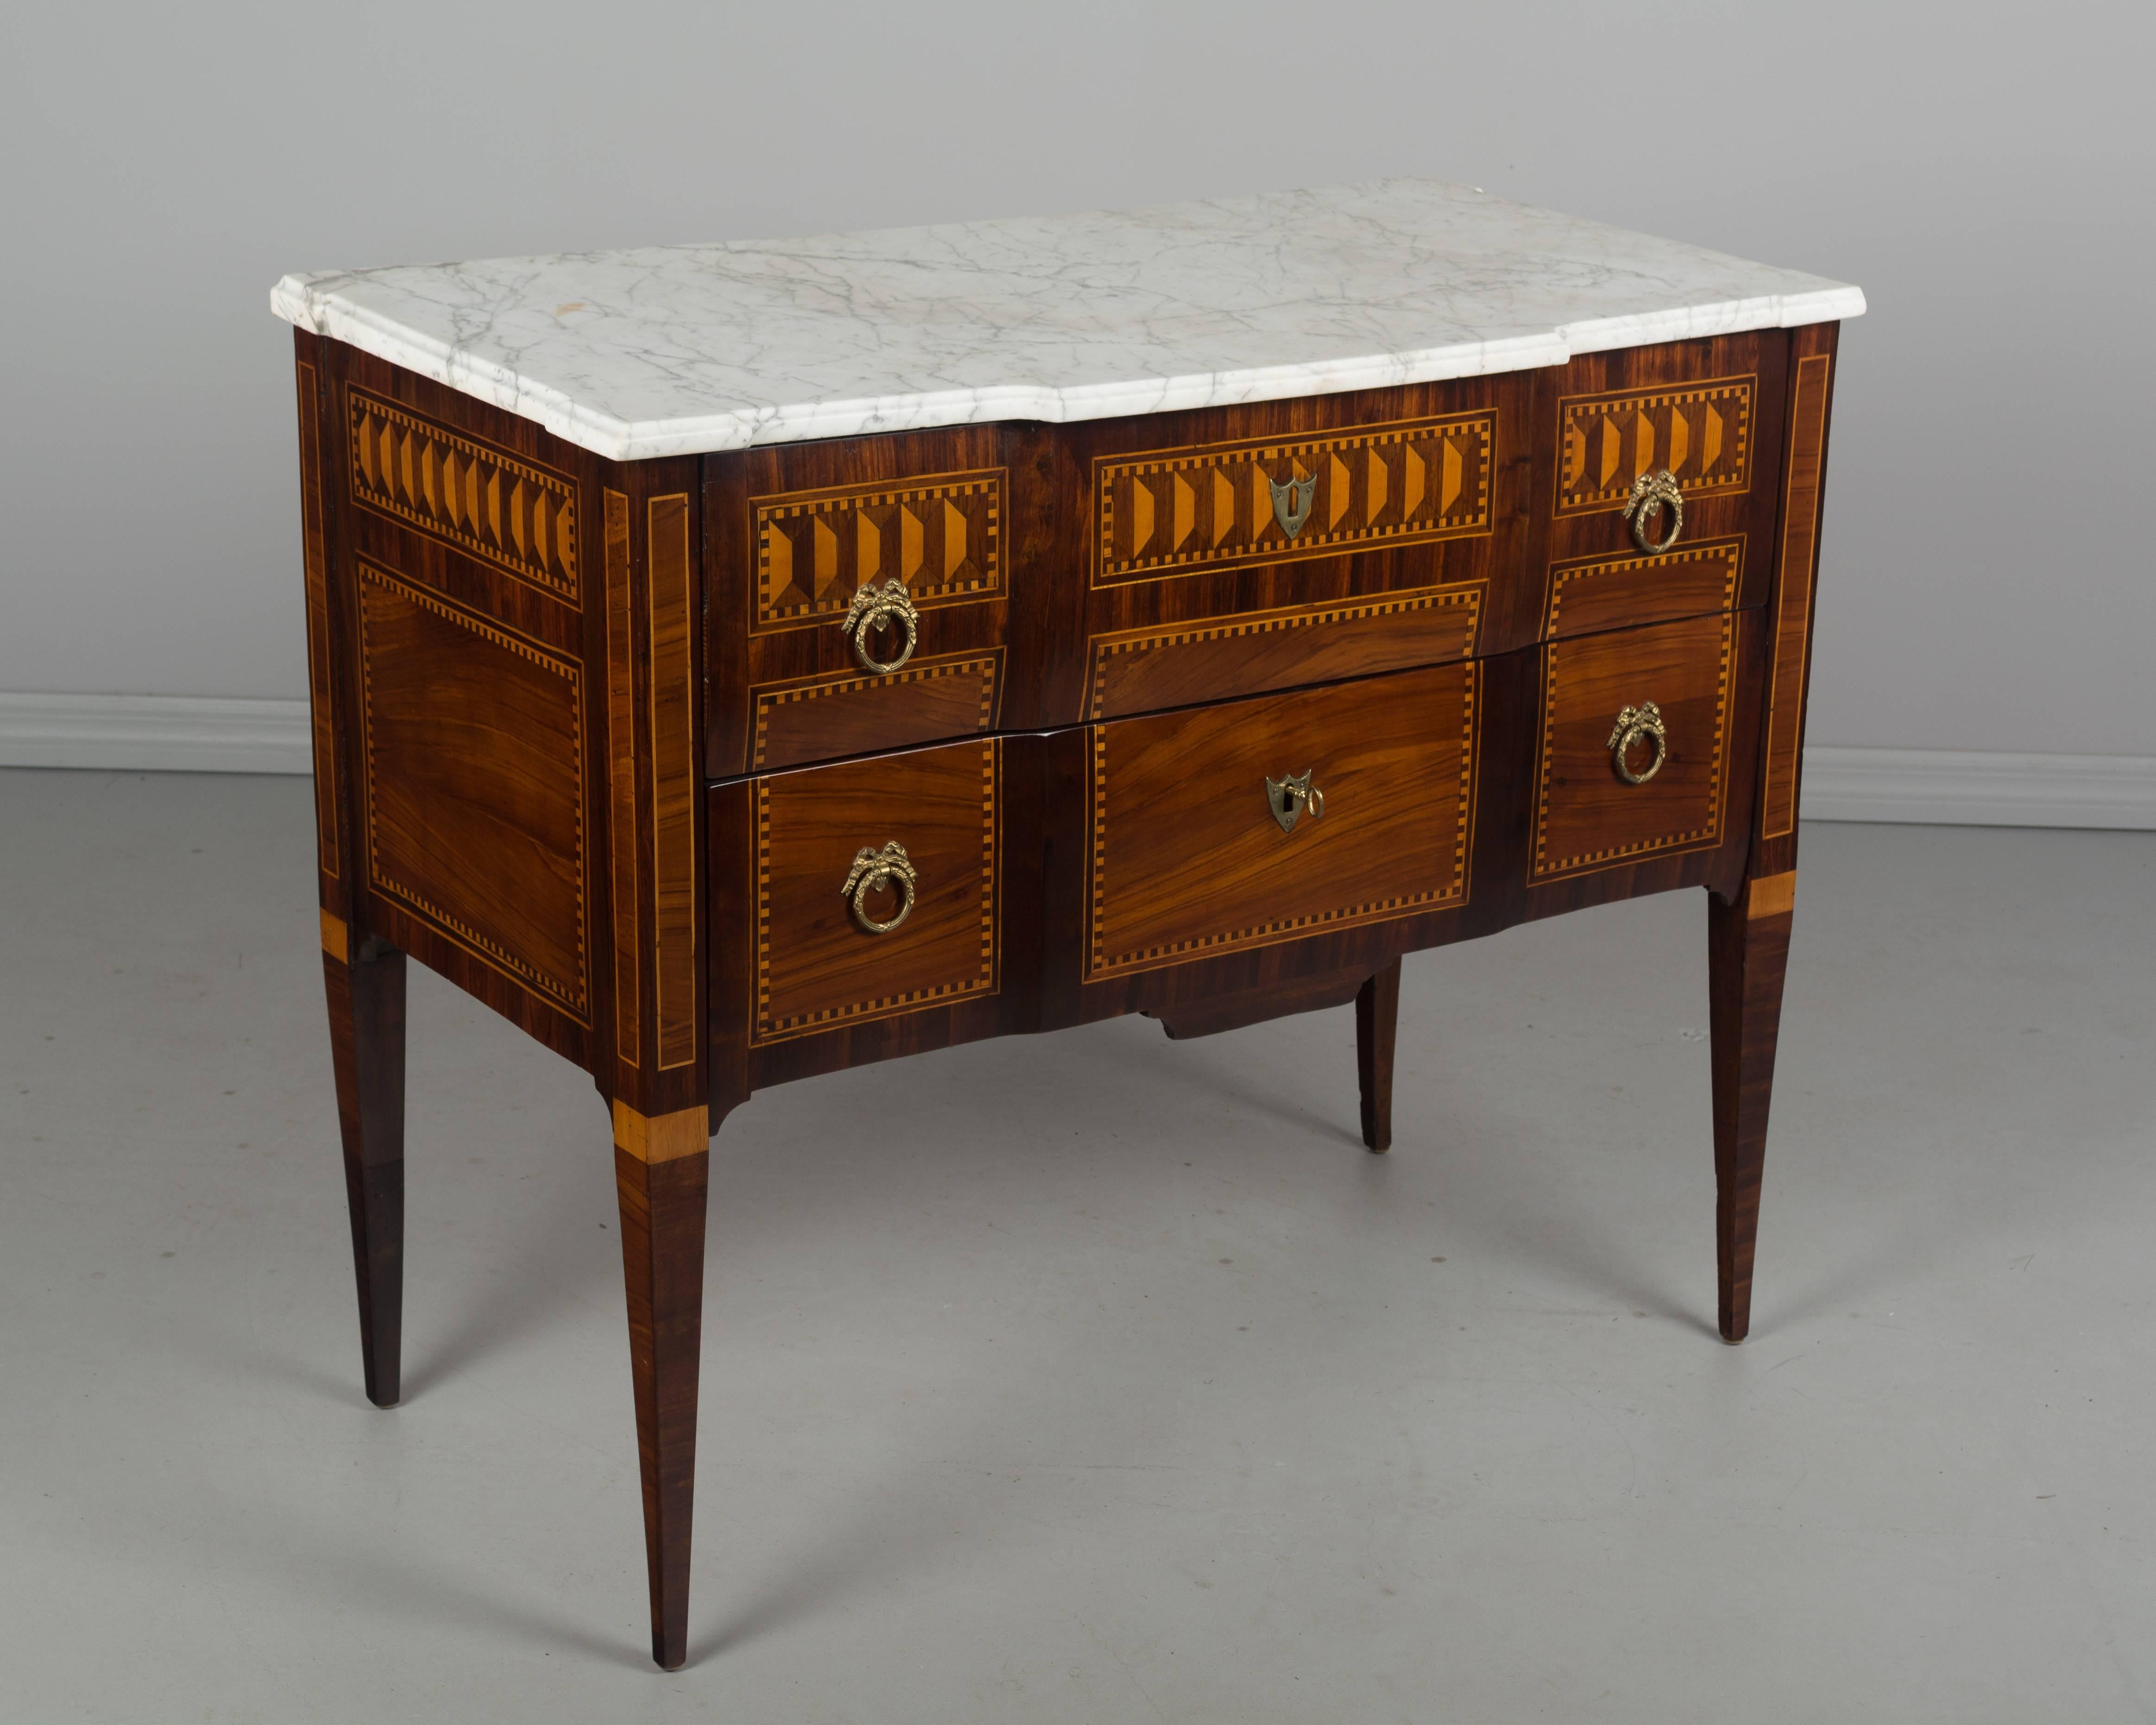 An 18th century French Louis XVI marquetry commode with various veneers, mostly walnut and mahogany. Nice proportions with slender tapered legs. Pegged construction with mortise and tenon joints. French polish finish. Two dovetailed drawers with